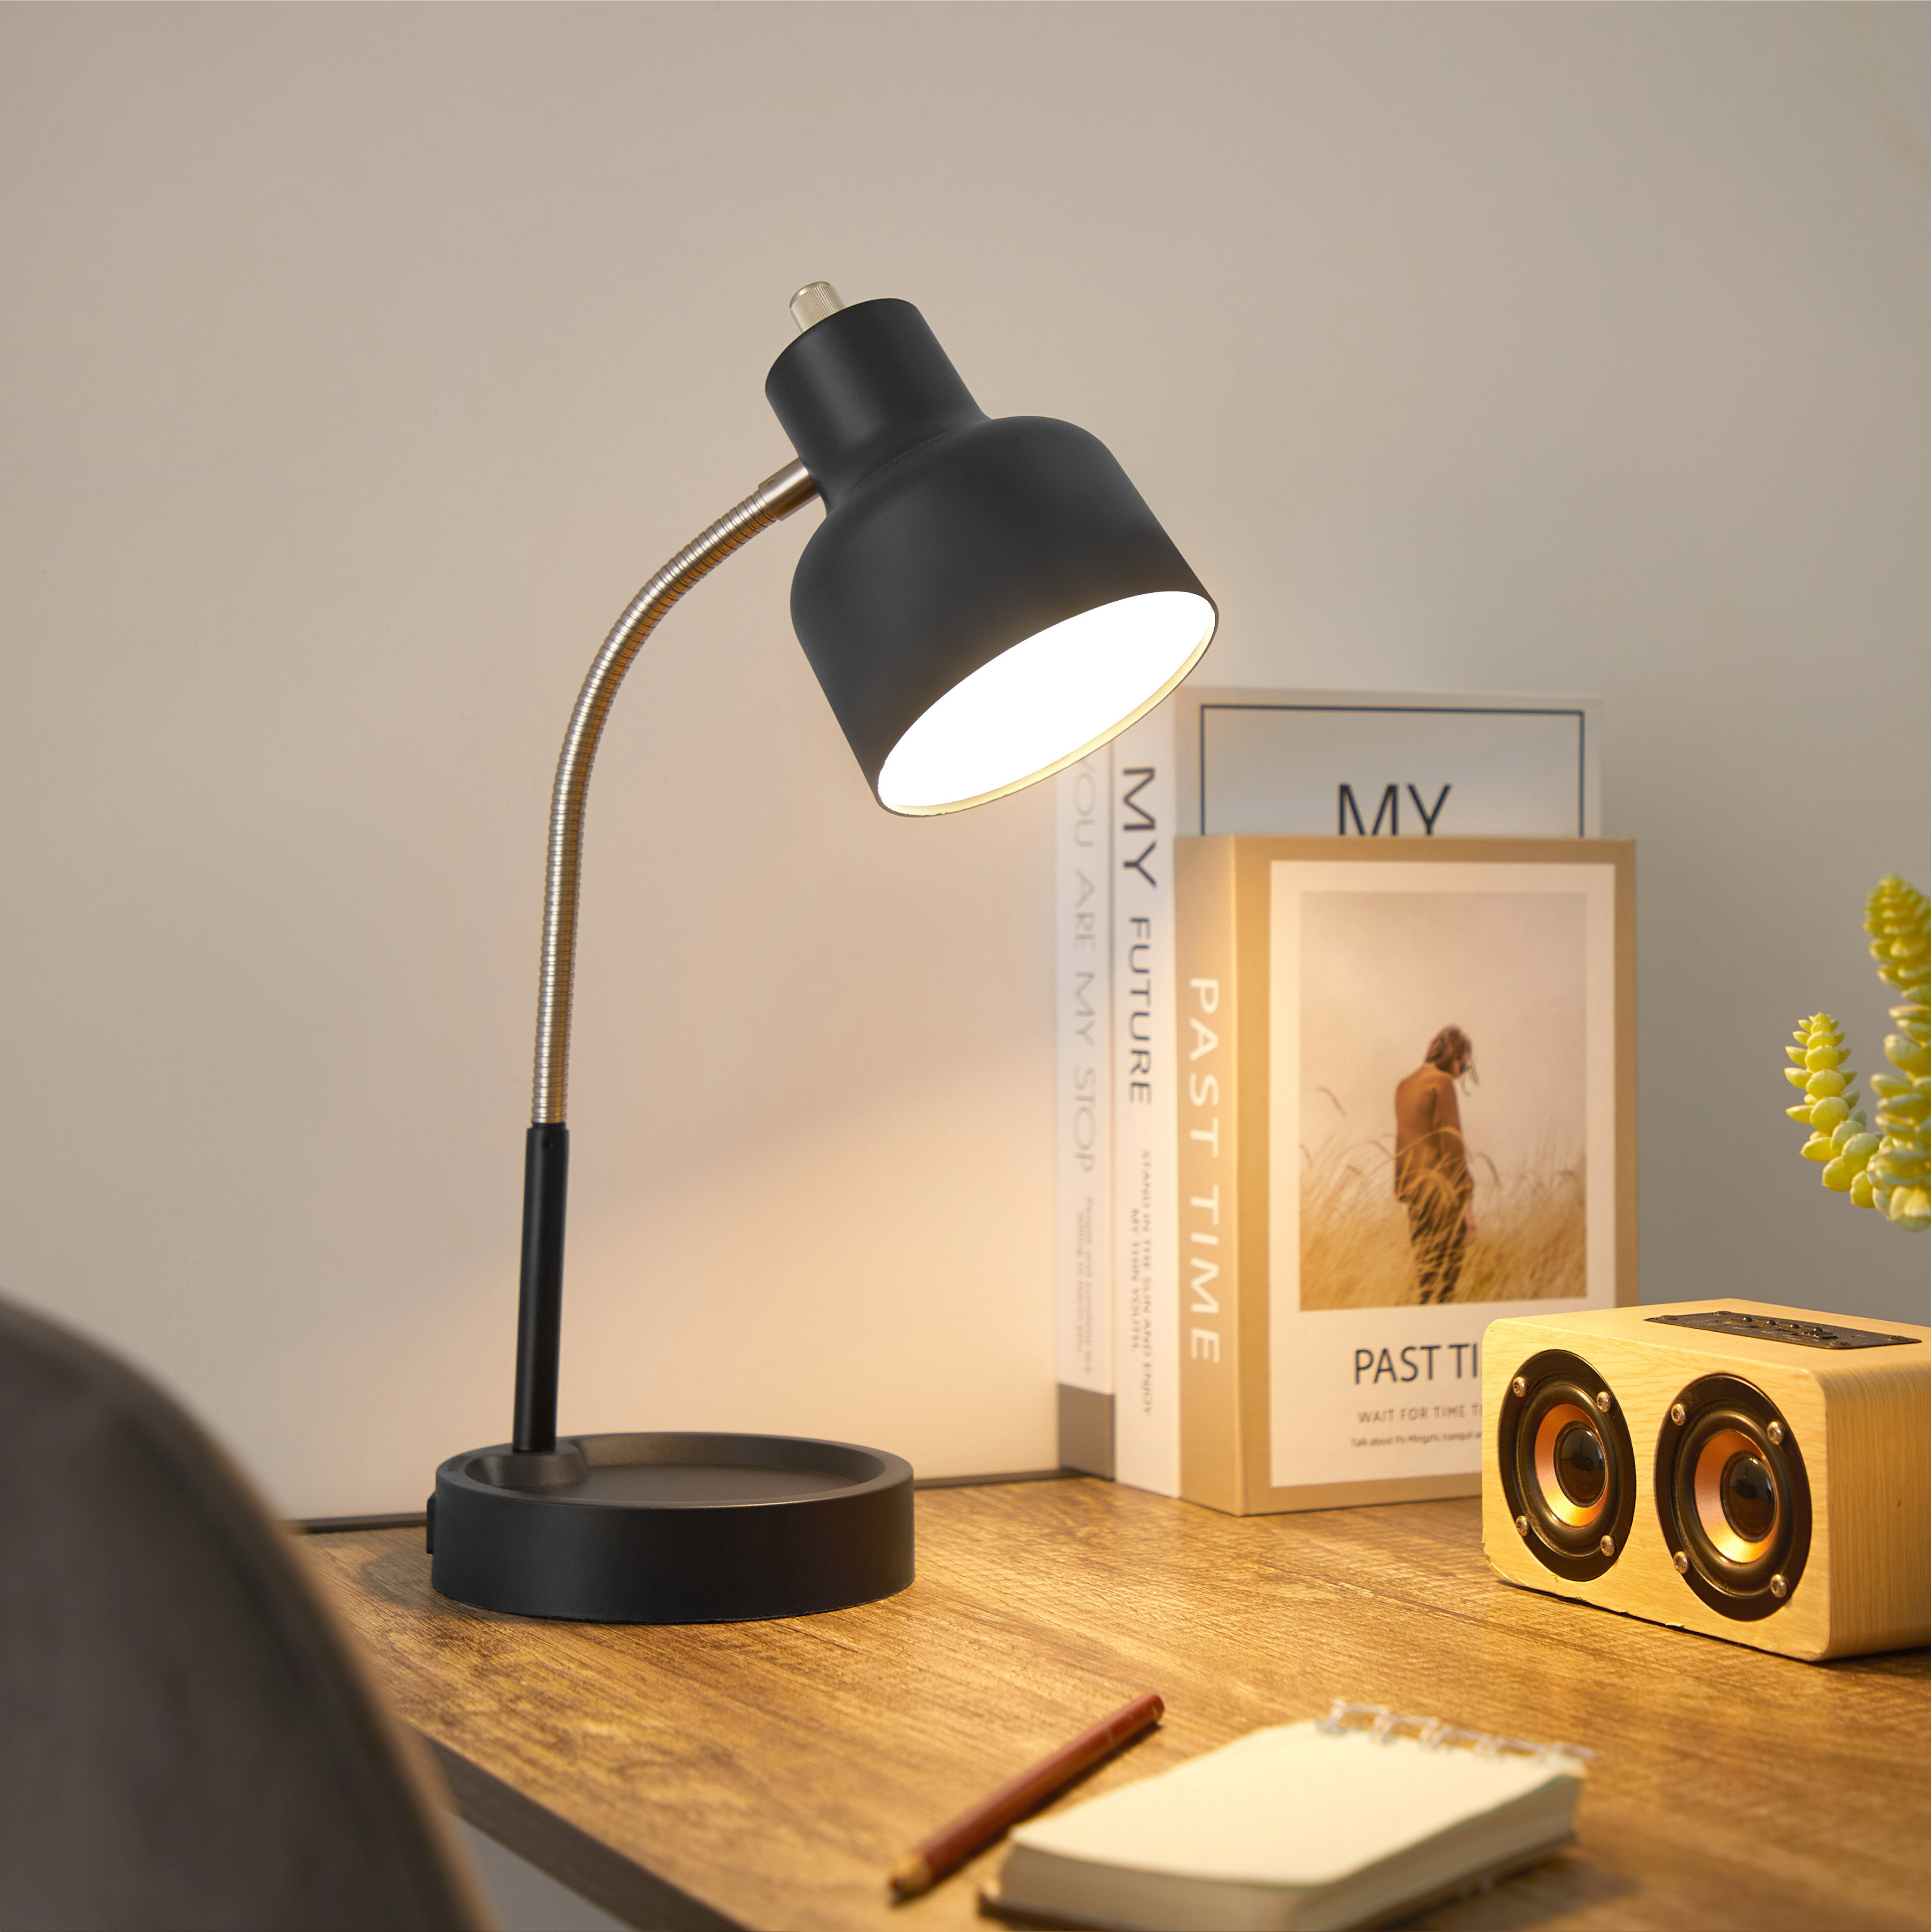 Mainstays LED Desk Lamp with Catch-All Base & AC Outlet, Matte Black - image 2 of 10